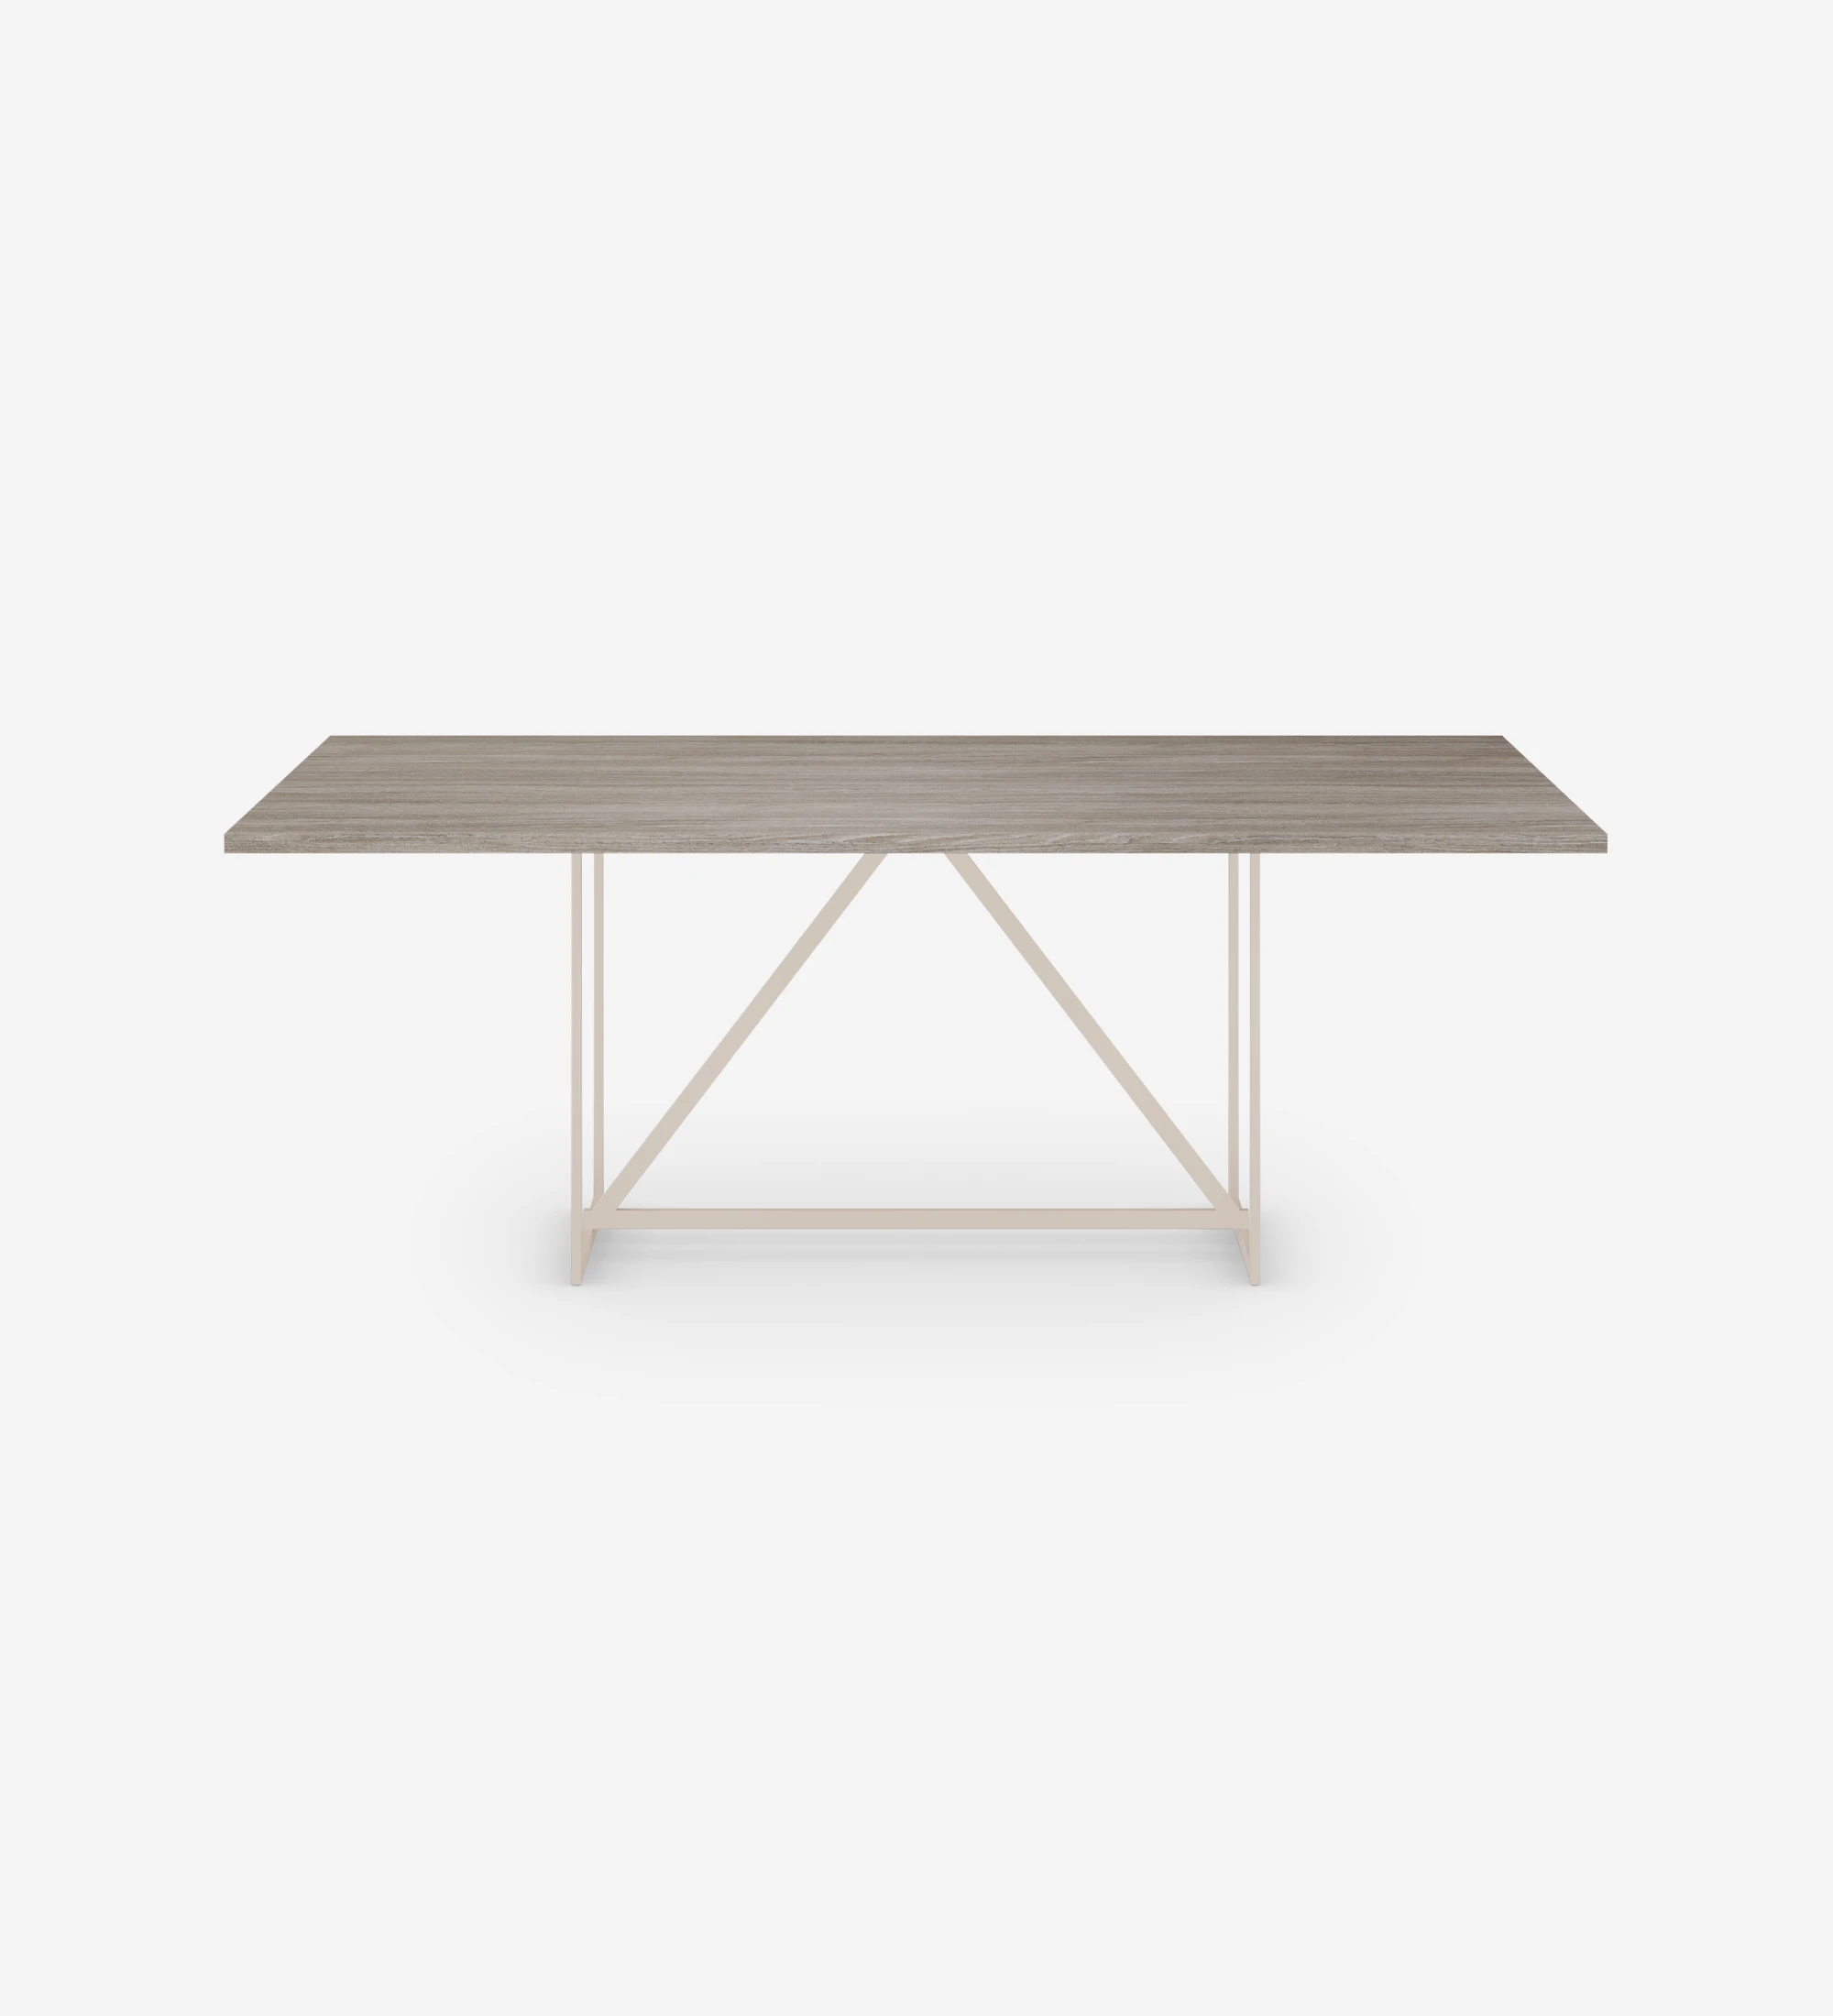 Chicago rectangular dining table 180 x 100 cm, decapé oak top, pearl lacquered metal feet.